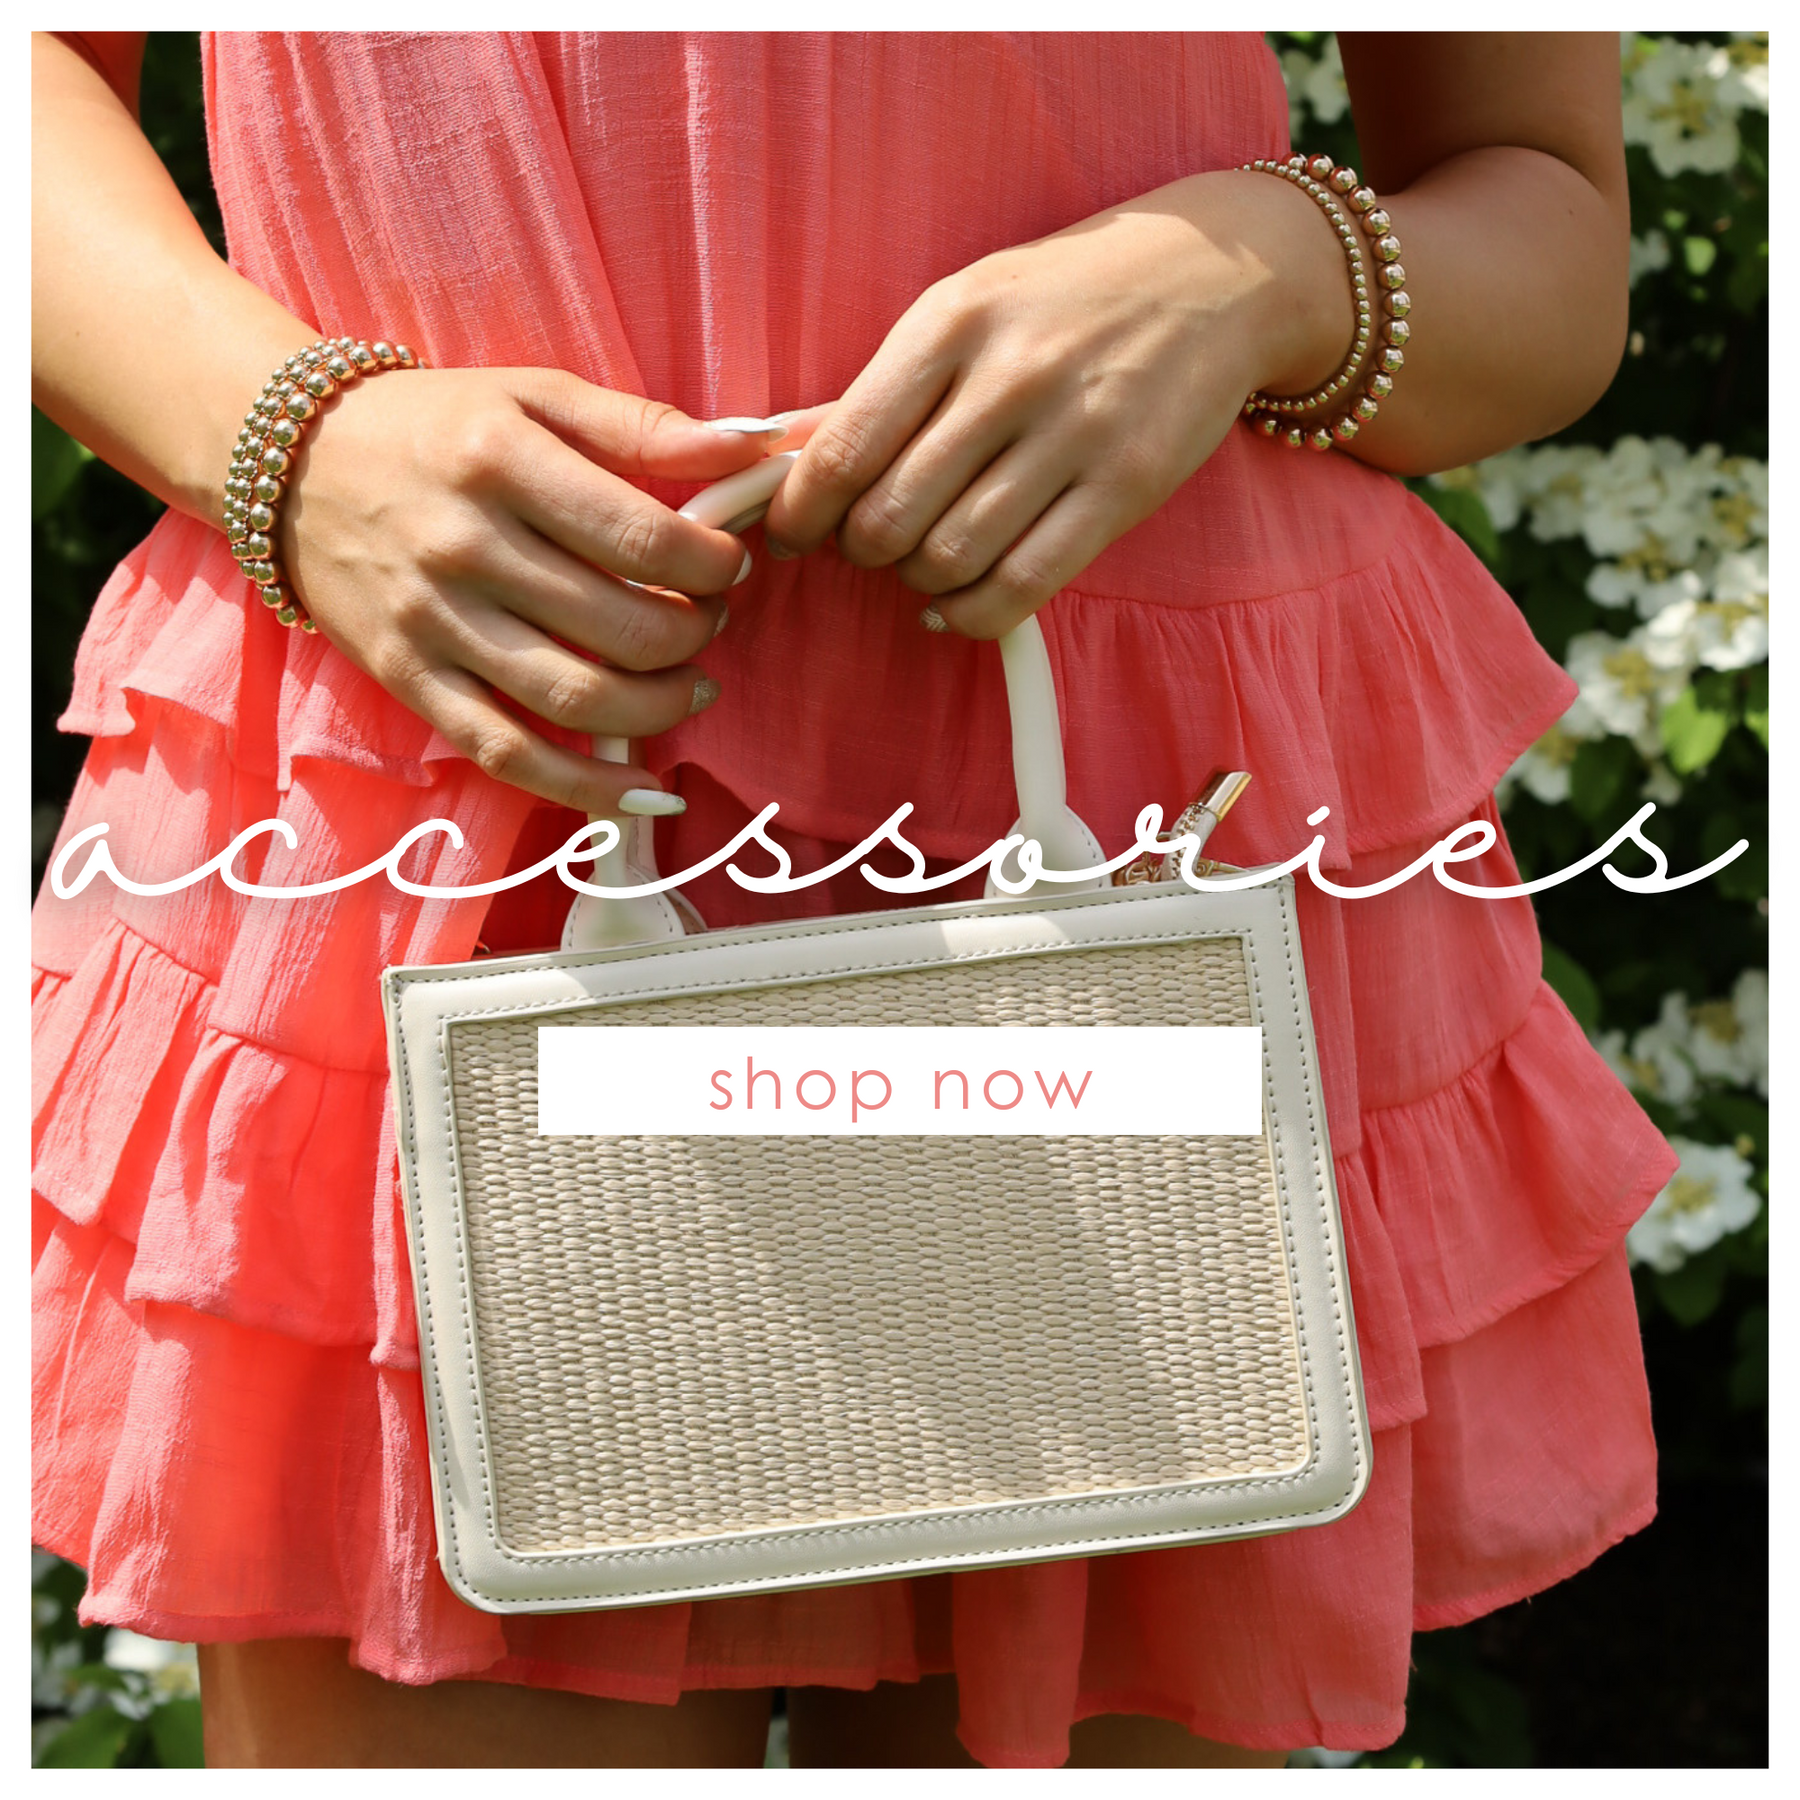 Shop our cute new accessories now! 